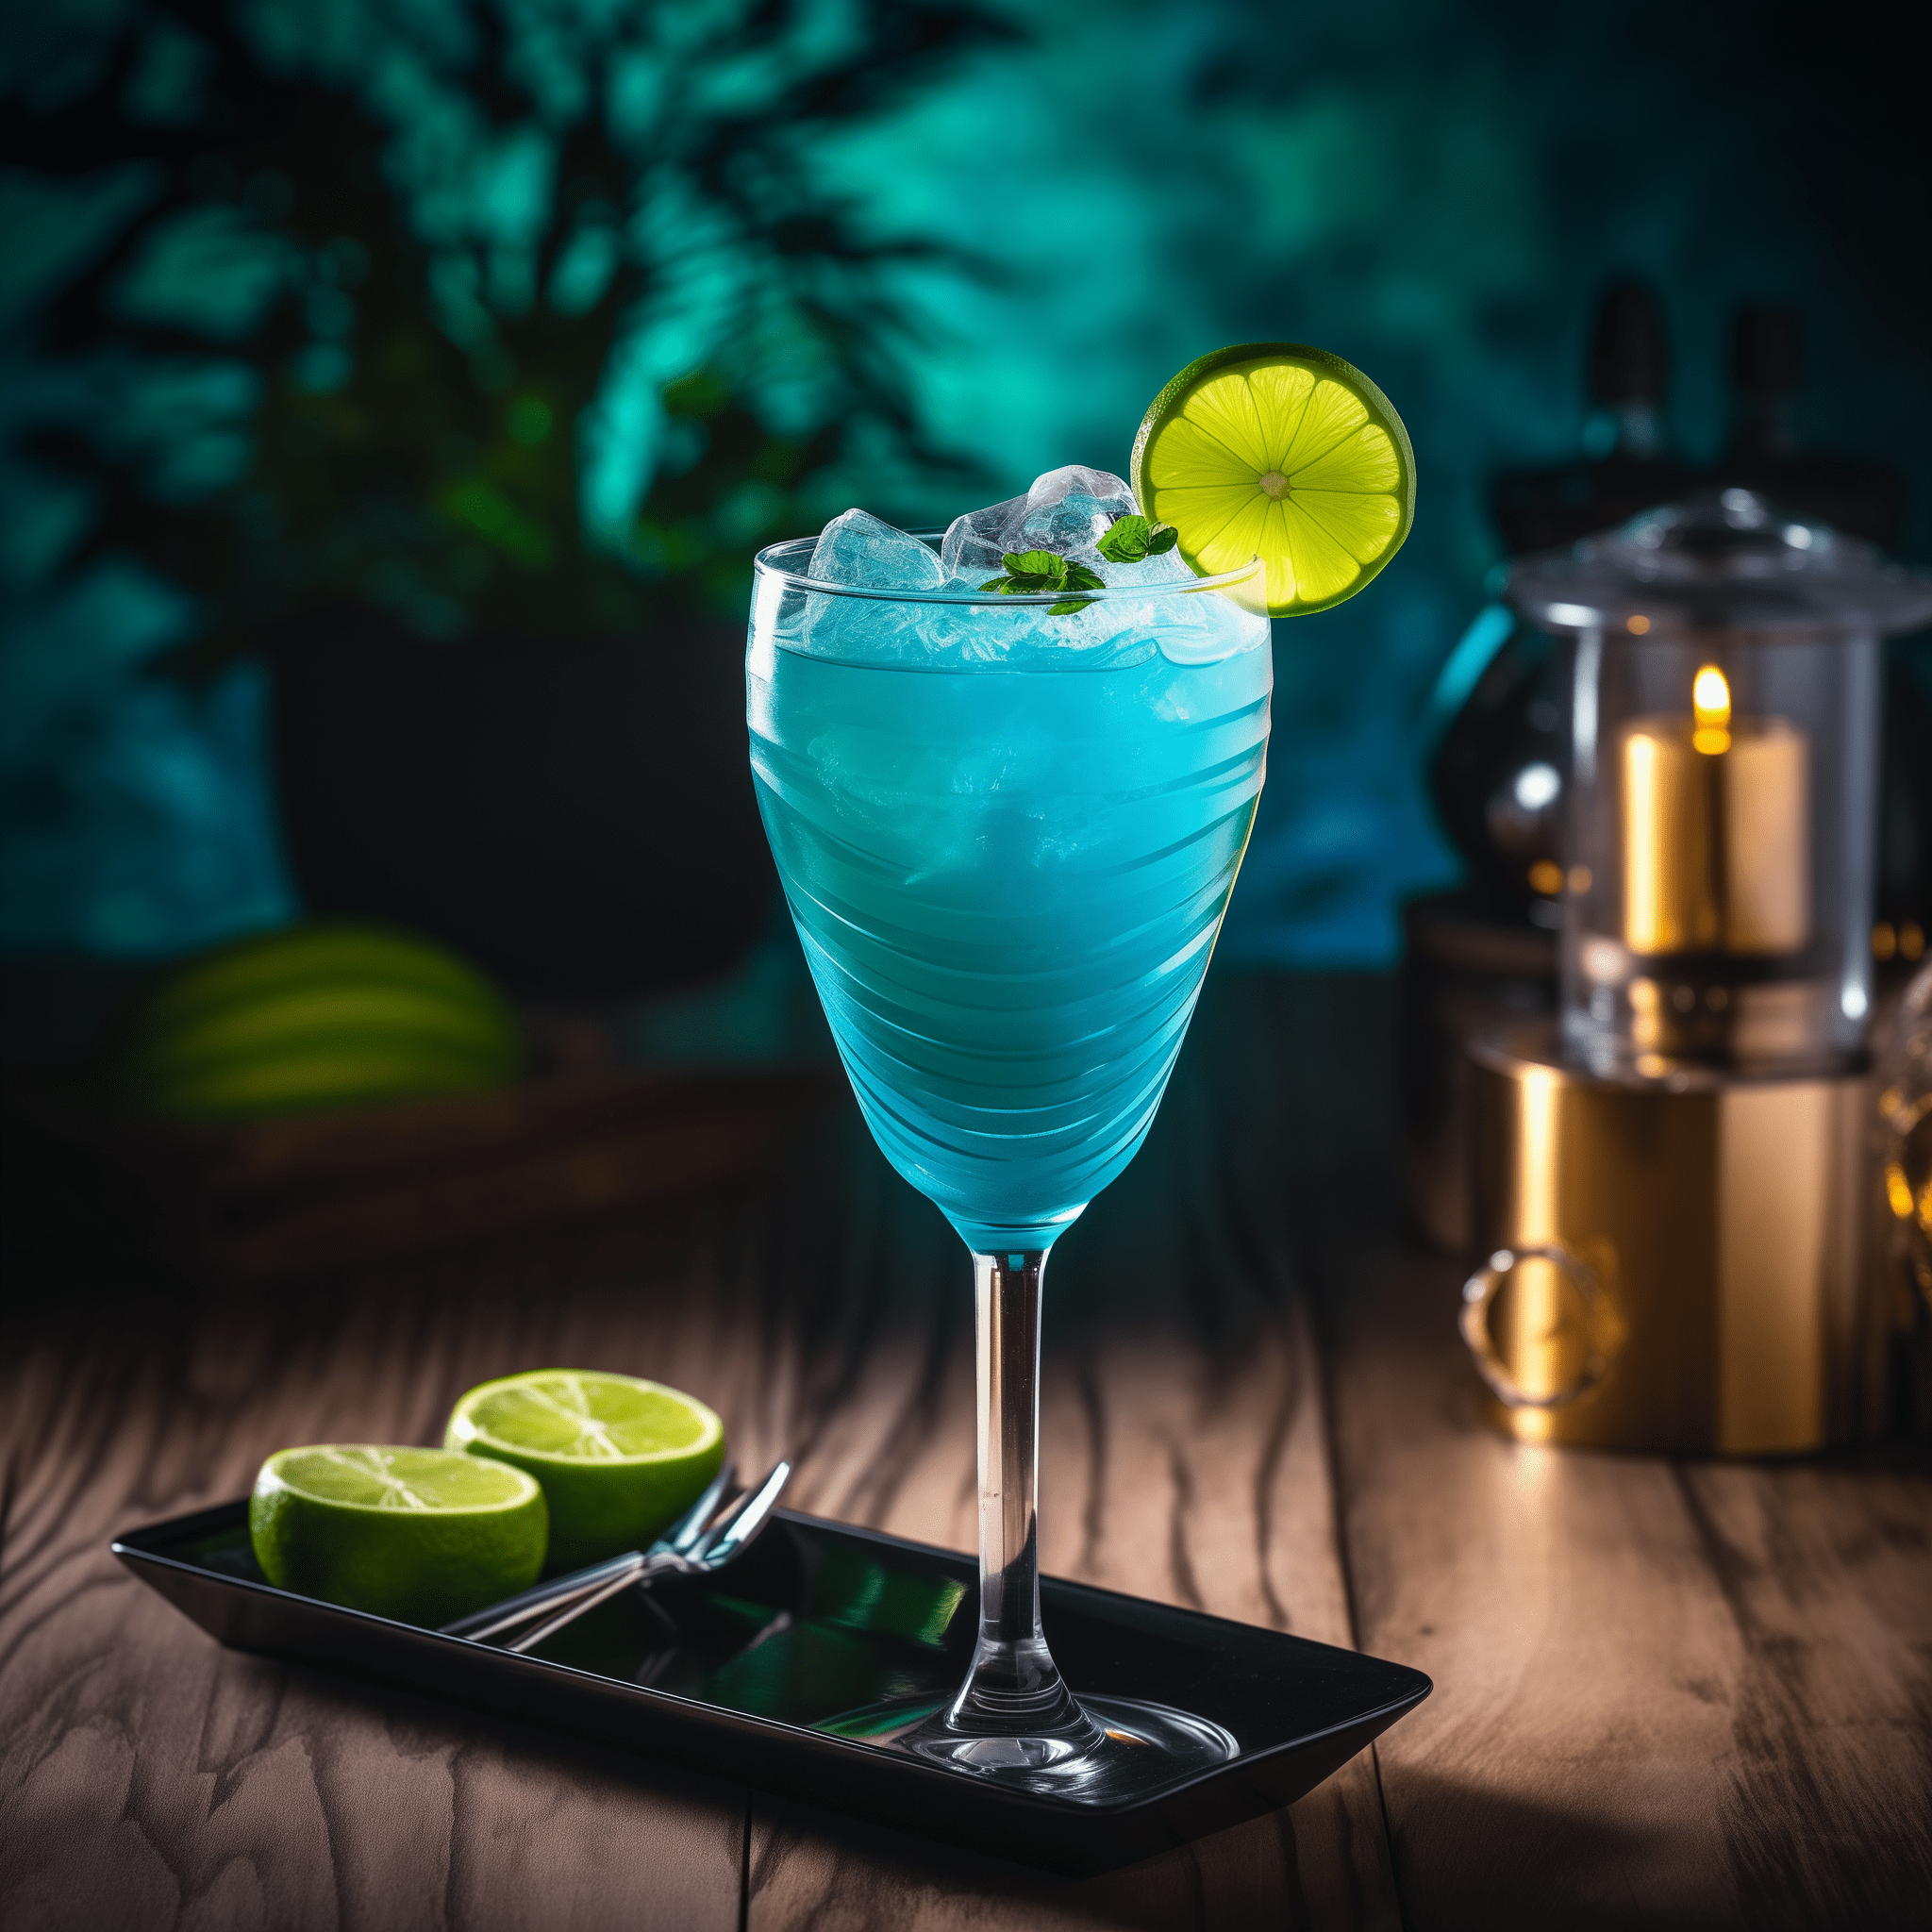 Blue Kamikaze Cocktail Recipe - The Blue Kamikaze offers a tantalizing blend of sweet and sour with a fruity undertone, thanks to the blue curaçao. It's a strong drink with a citrus kick that is both refreshing and bold.